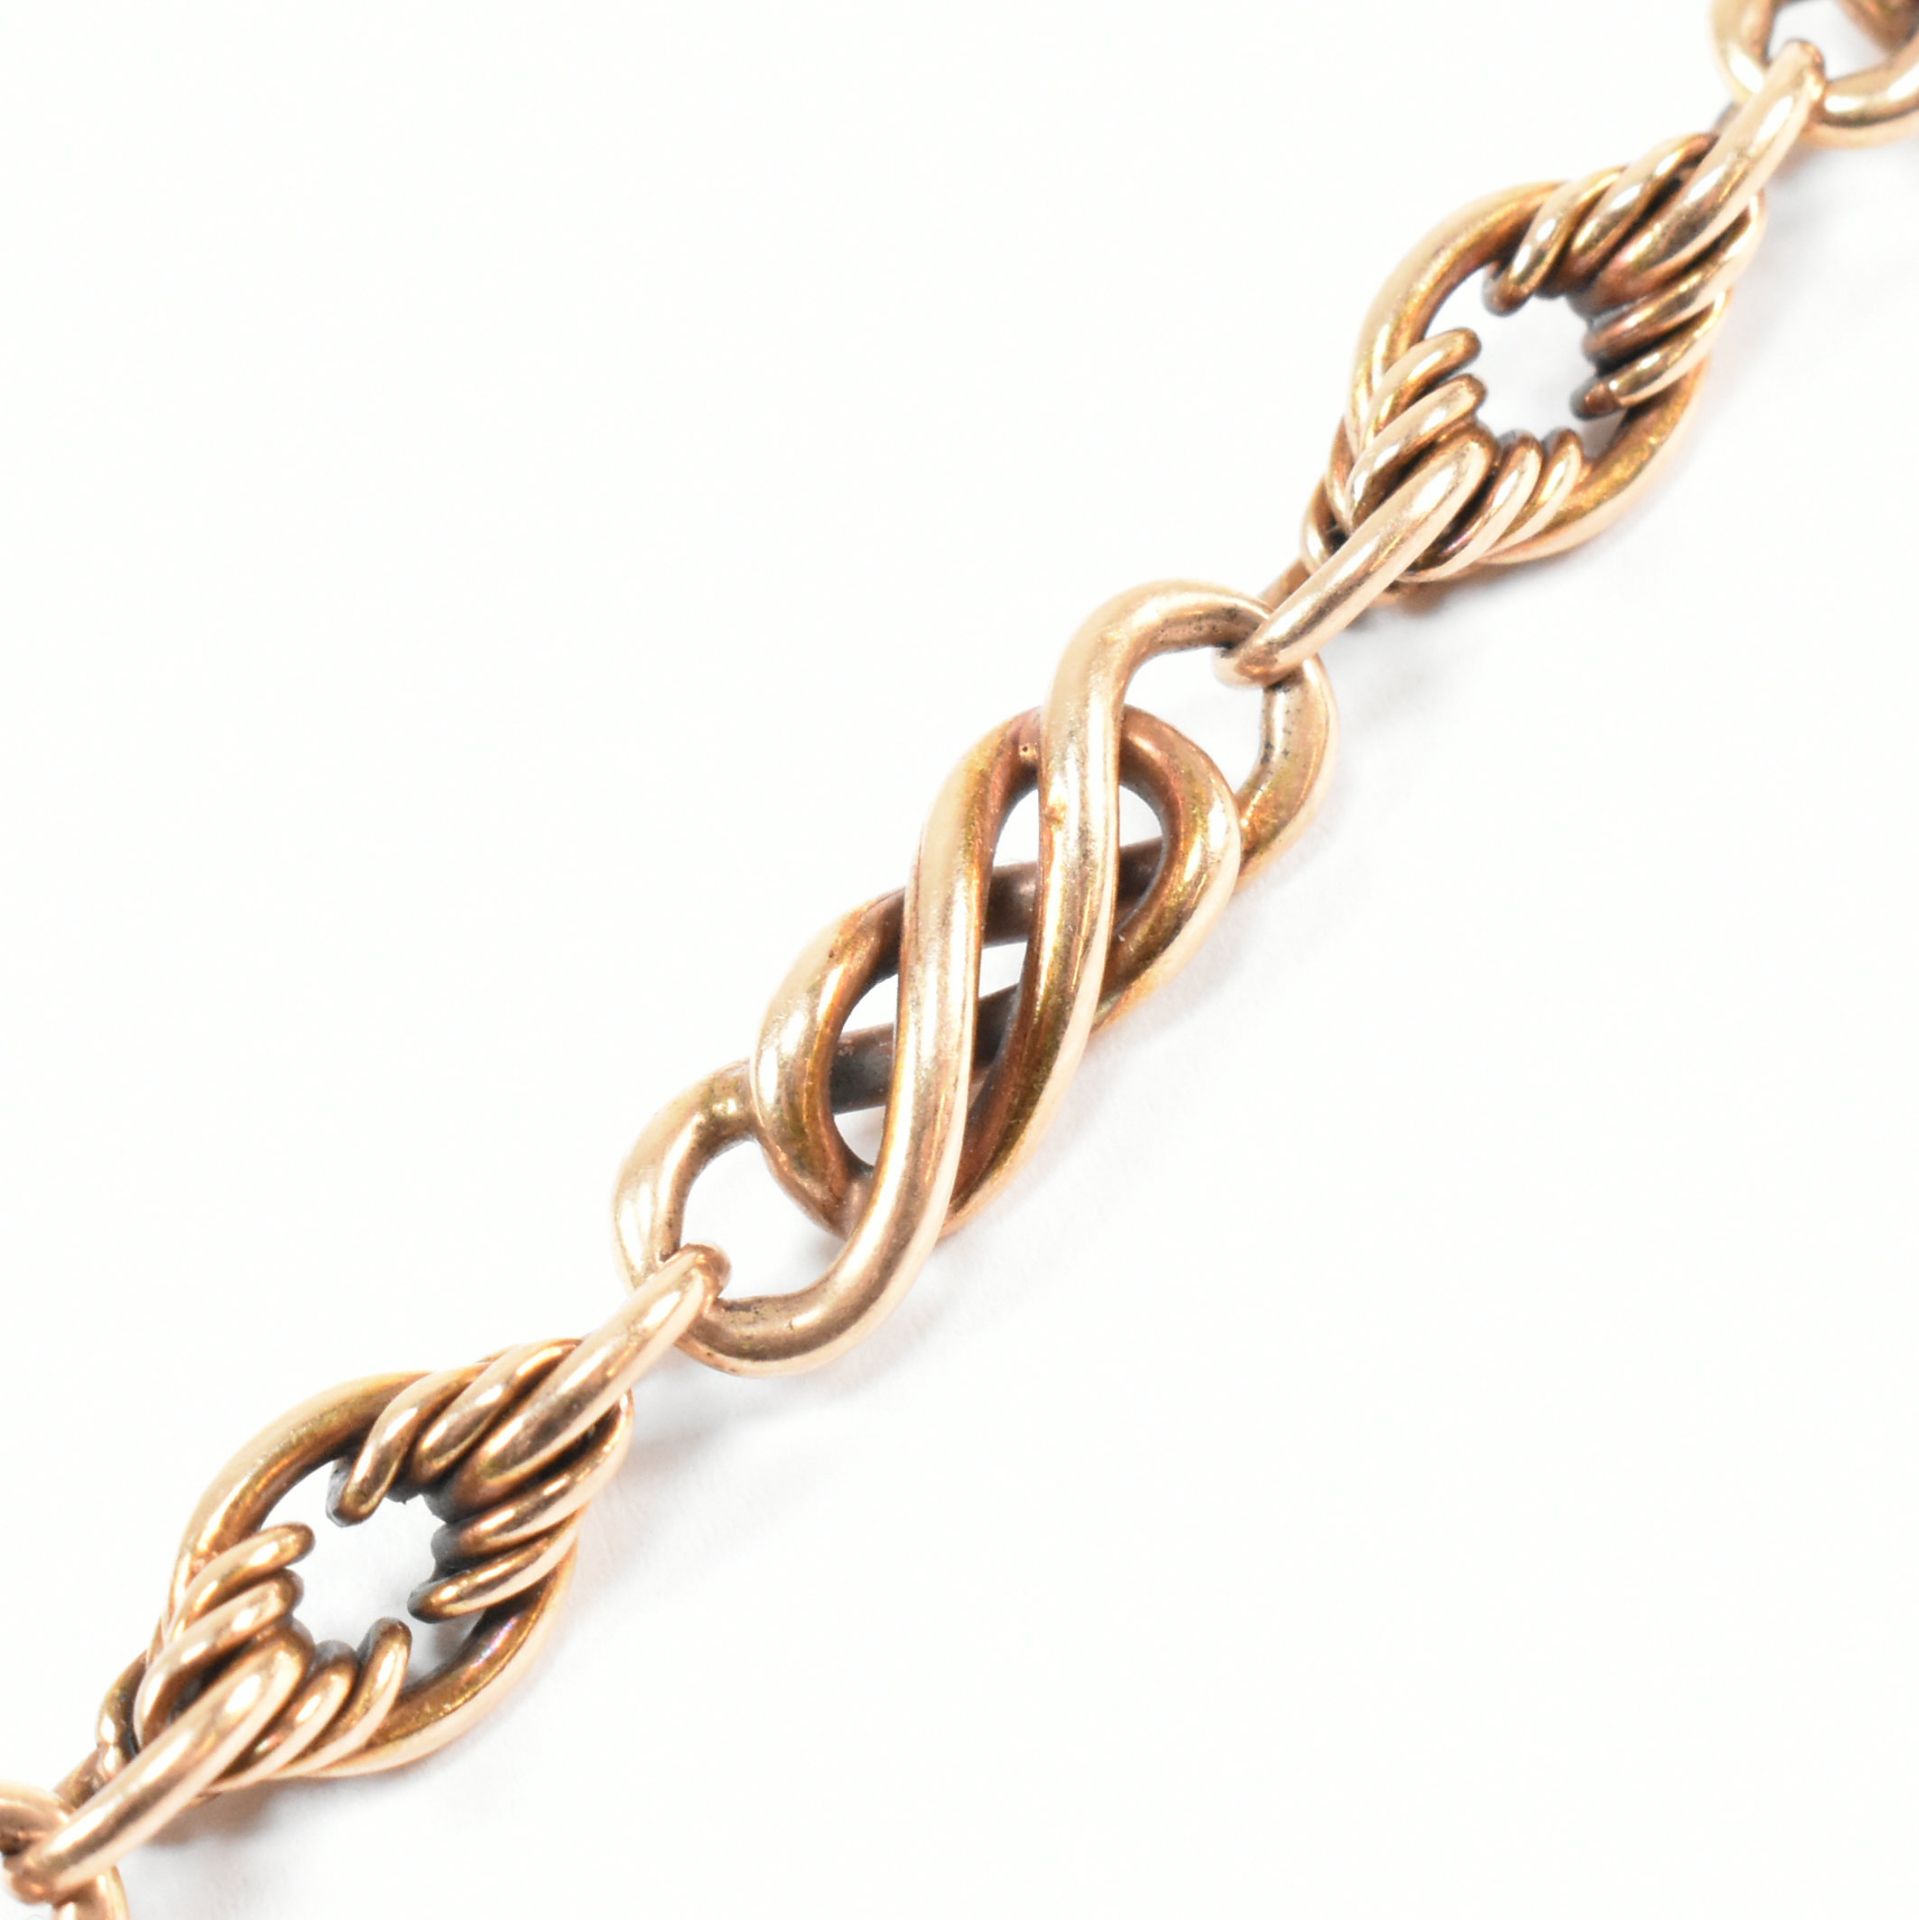 EDWARDIAN HALLMARKED 15CT GOLD ALBERT CHAIN WITH T-BAR - Image 4 of 5